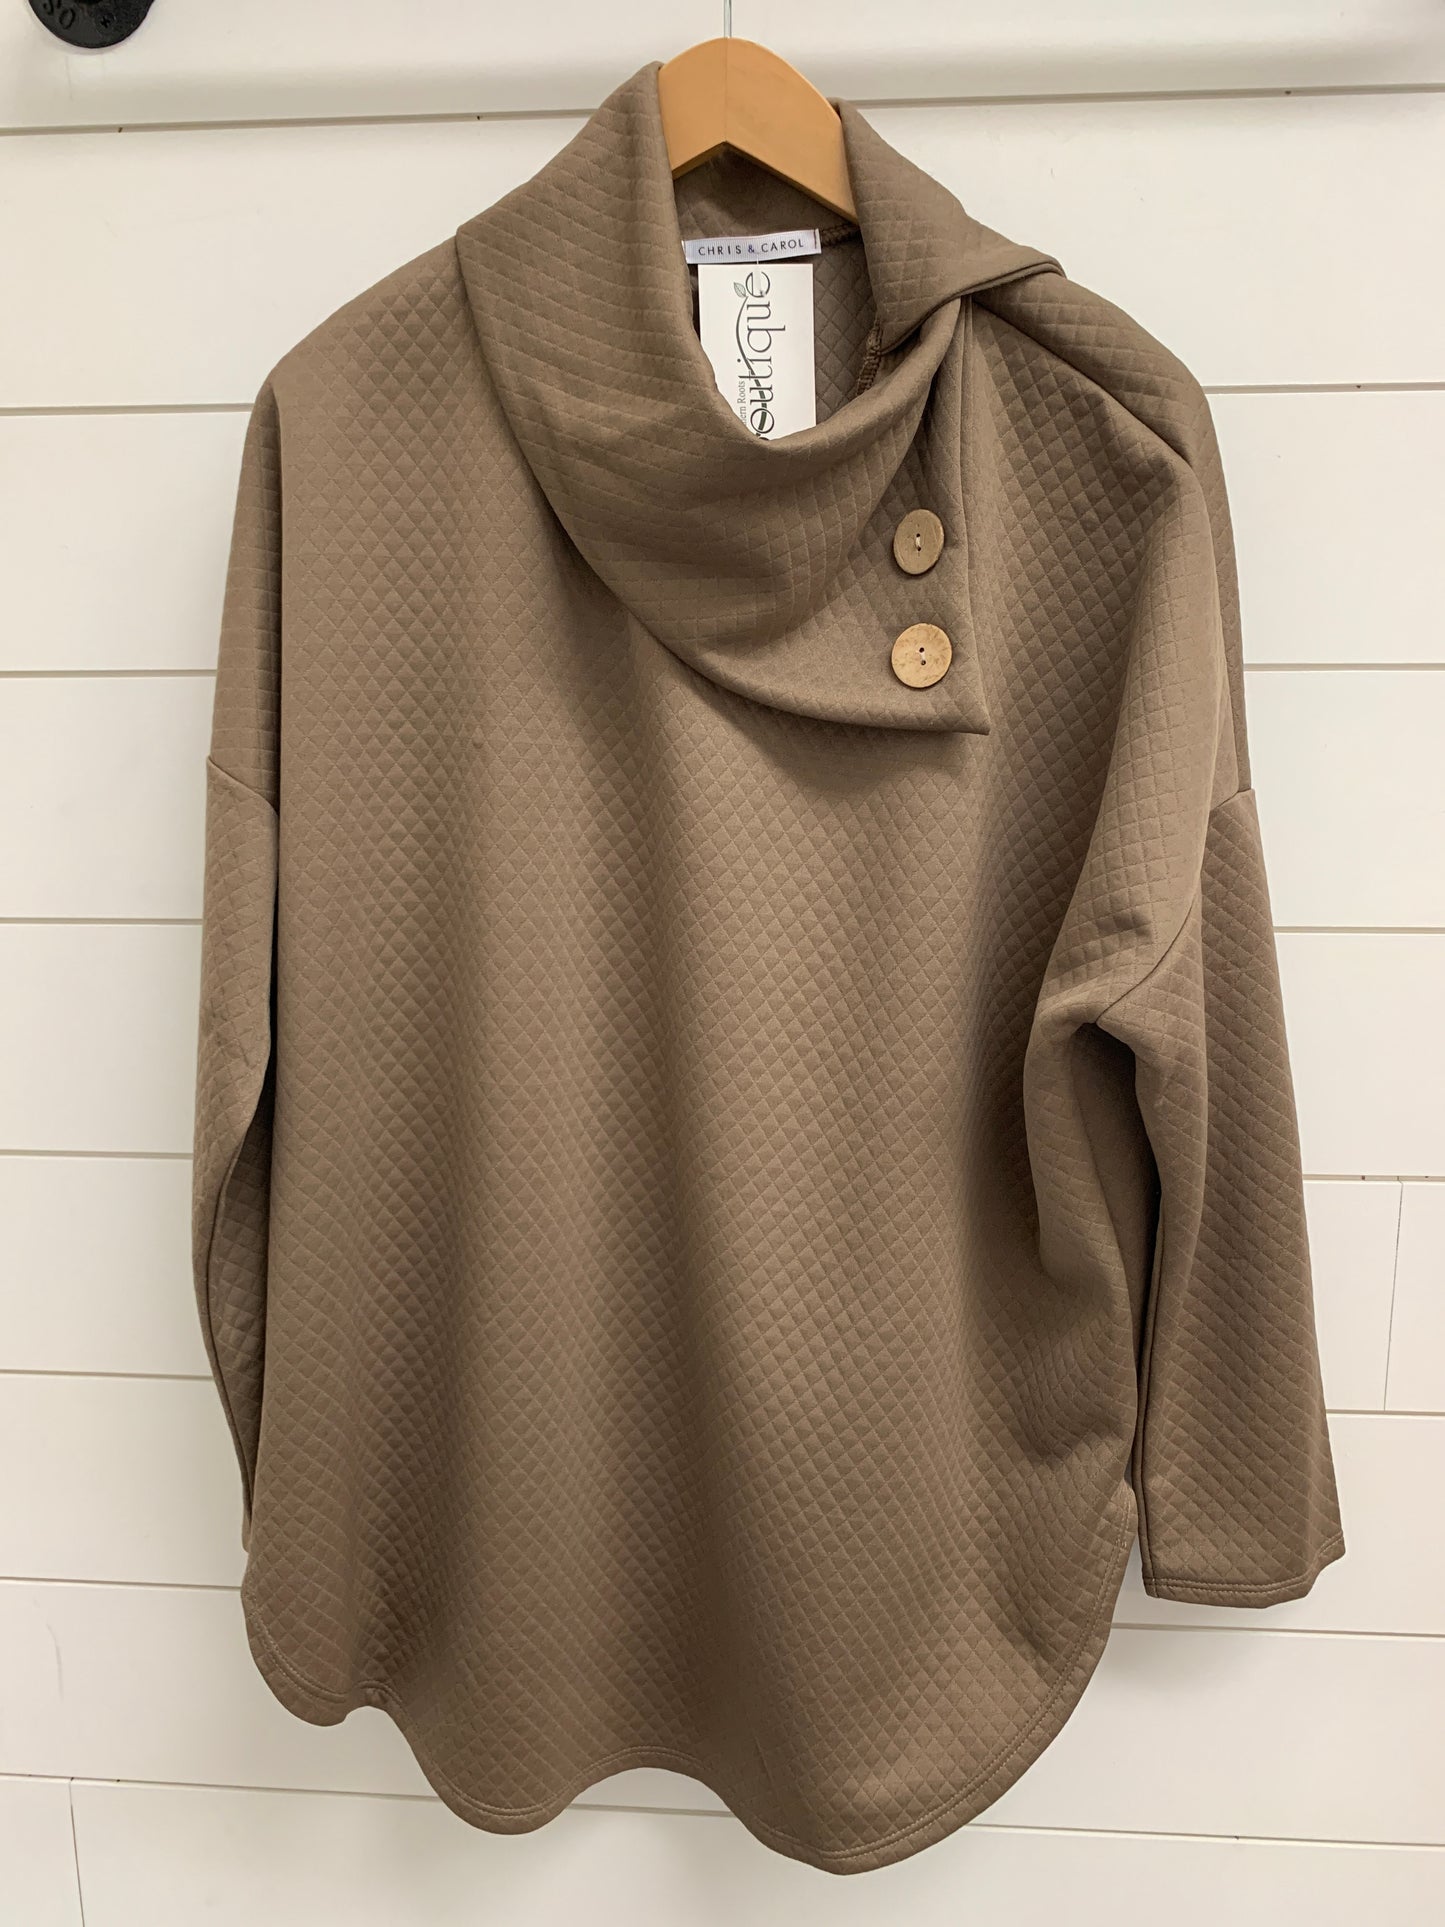 Sweater with double button neck feature